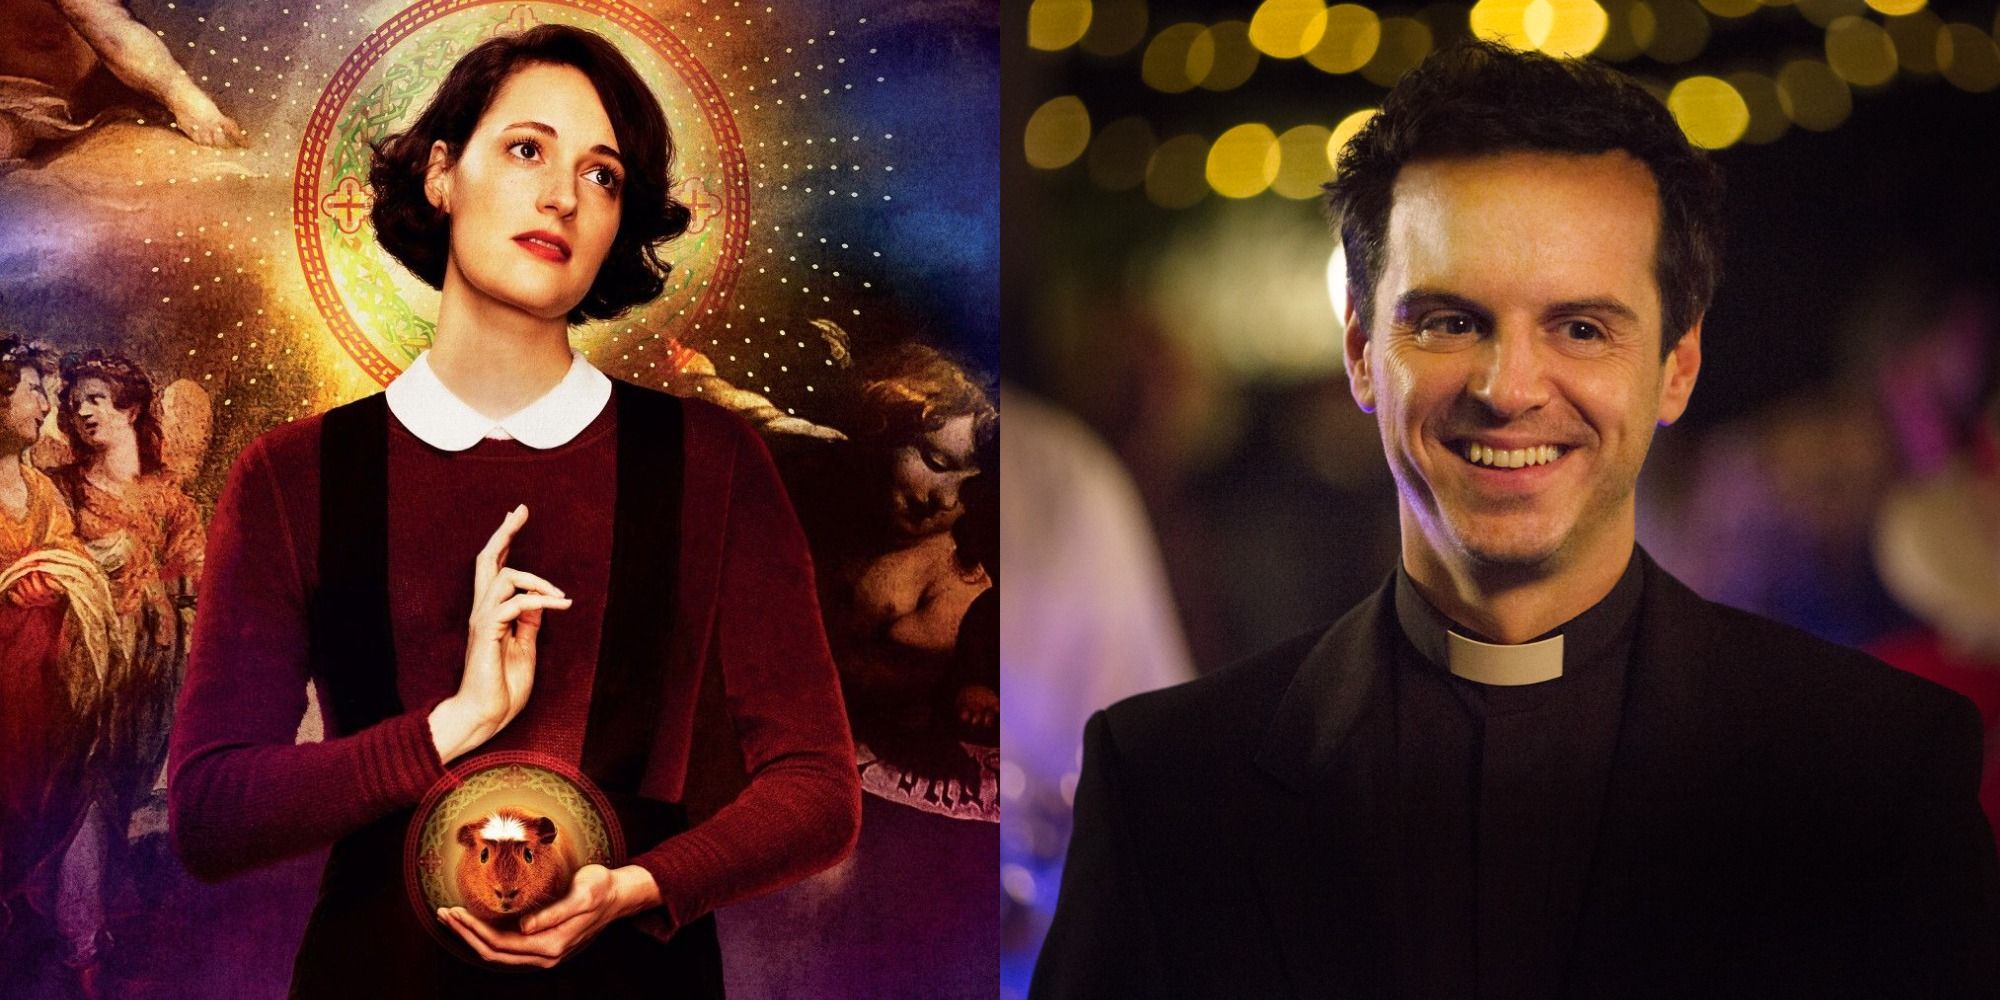 Split image of Fleabag dressed as a nun, and The Priest laughing in Fleabag.